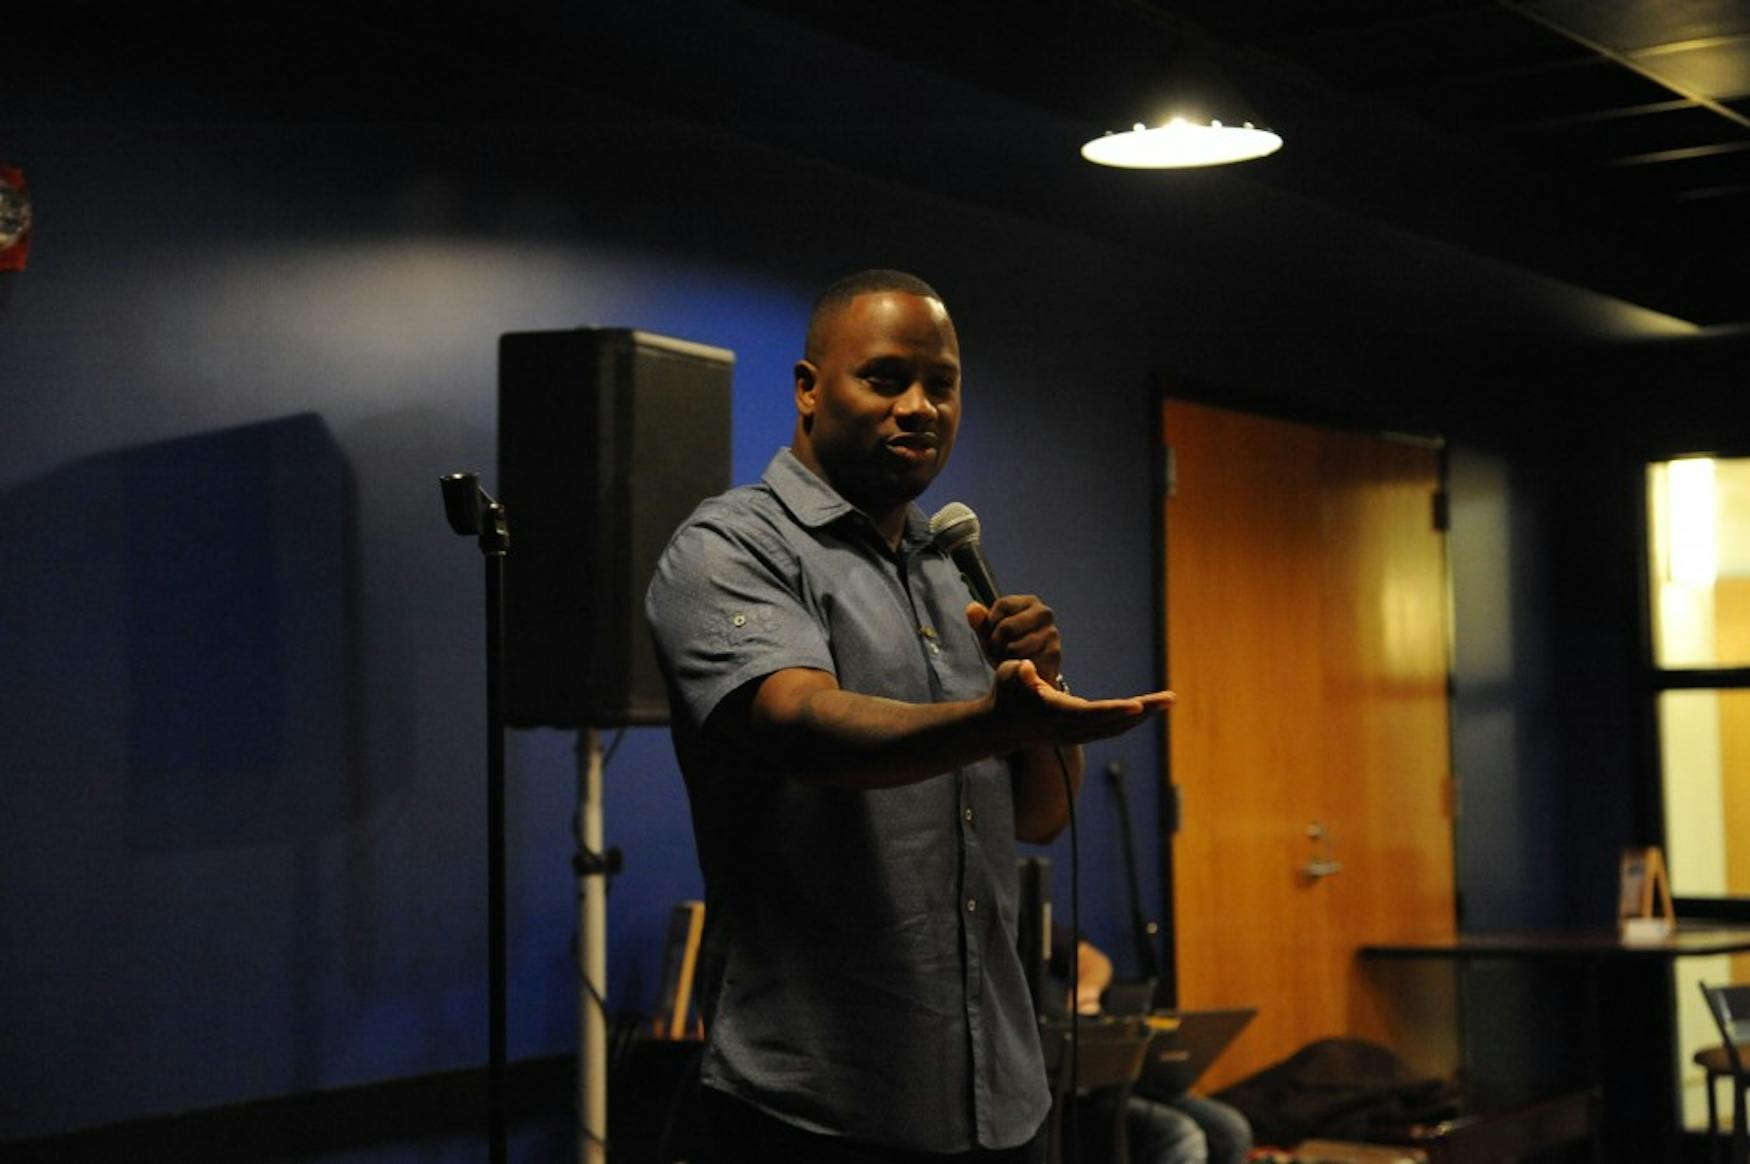 CONFRONTING TABOOS: On Friday night, comedian Arvin Mitchell, who is popular in the college circuit, performed a stand-up routine confronting social issues through comedy.